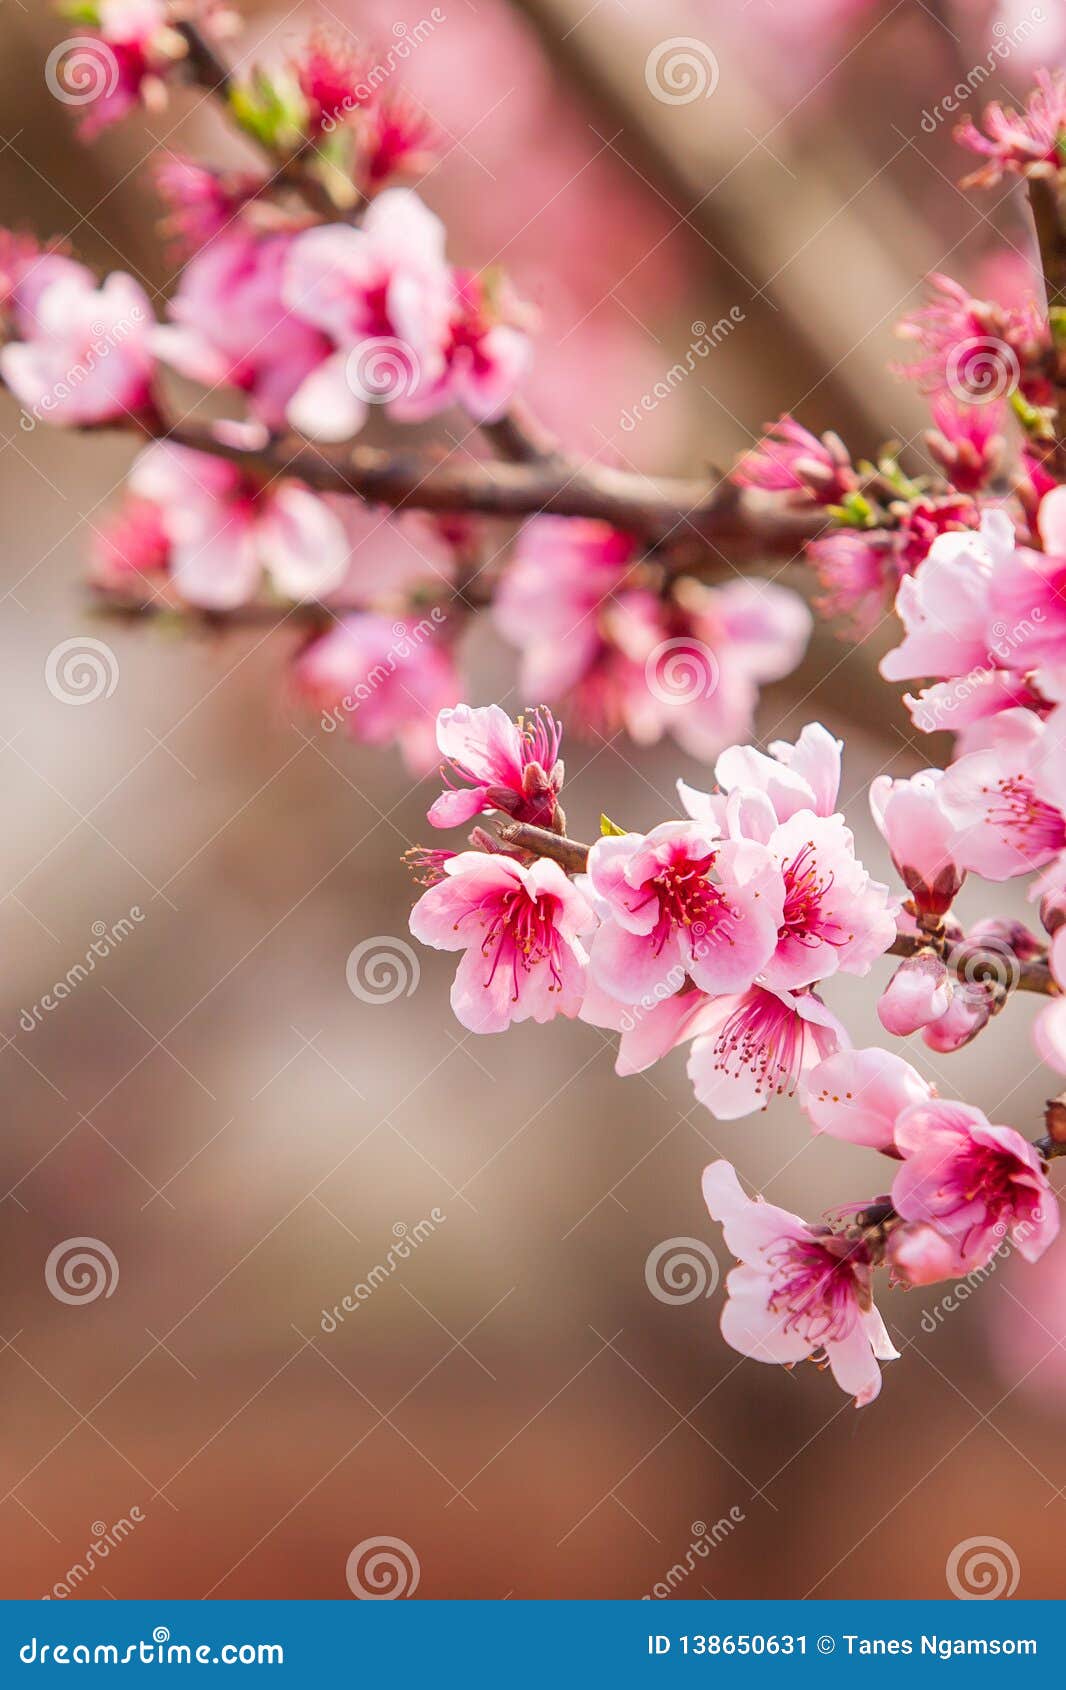 Blooming Peach Cherry in the Branches of Trees, Pink Flowers in Full ...